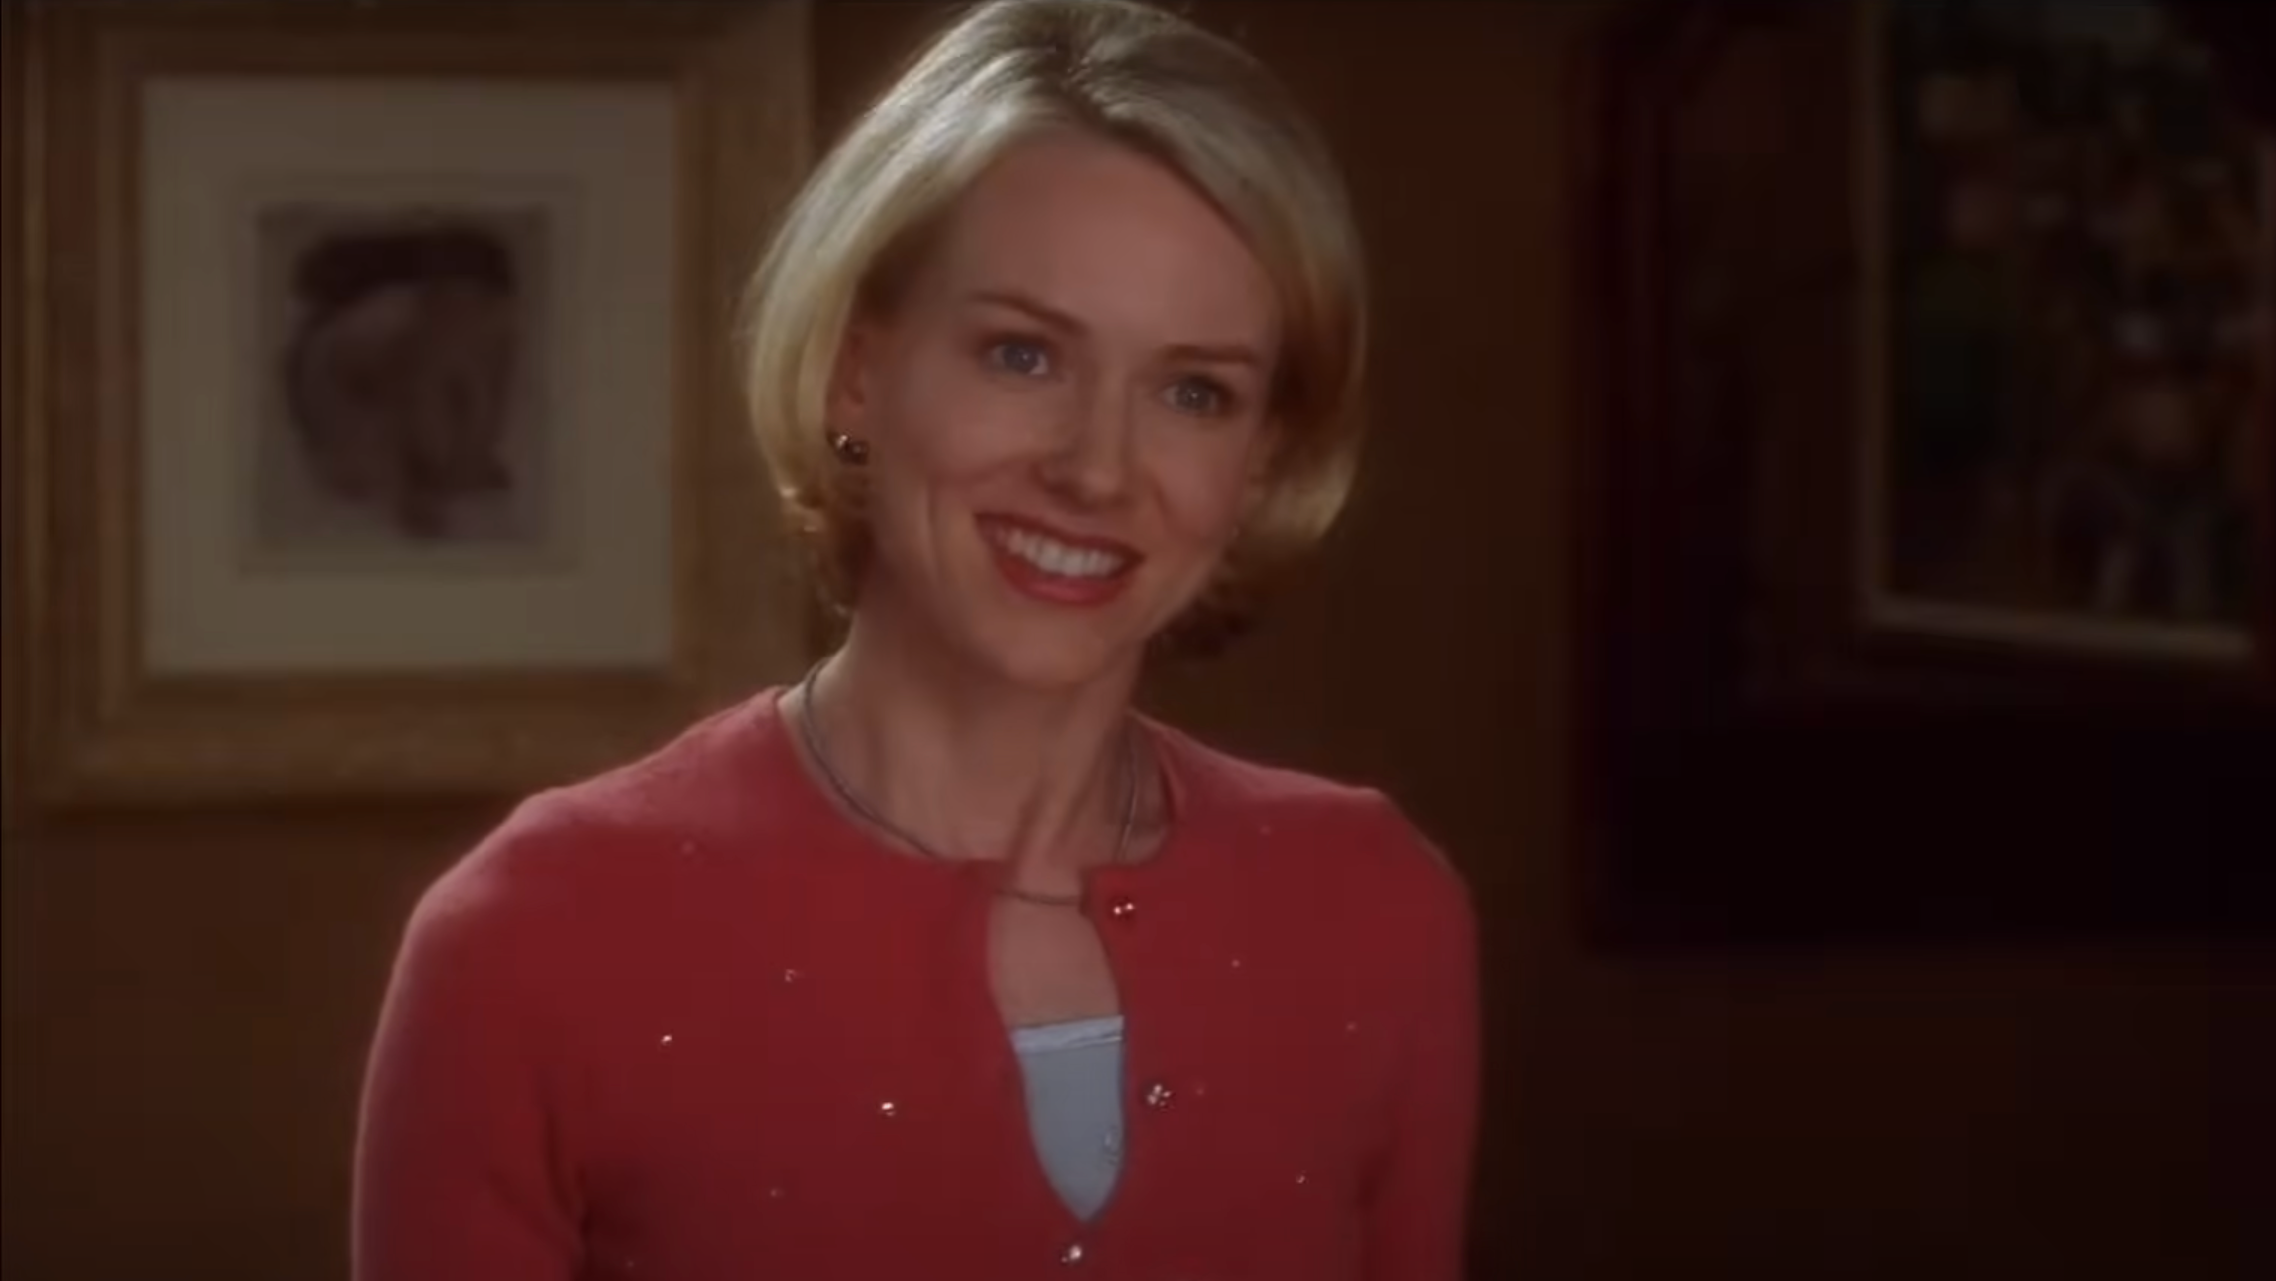 Naomi Watts’ nerves for Mulholland Drive masturbation scene gave her “explosive something or other”